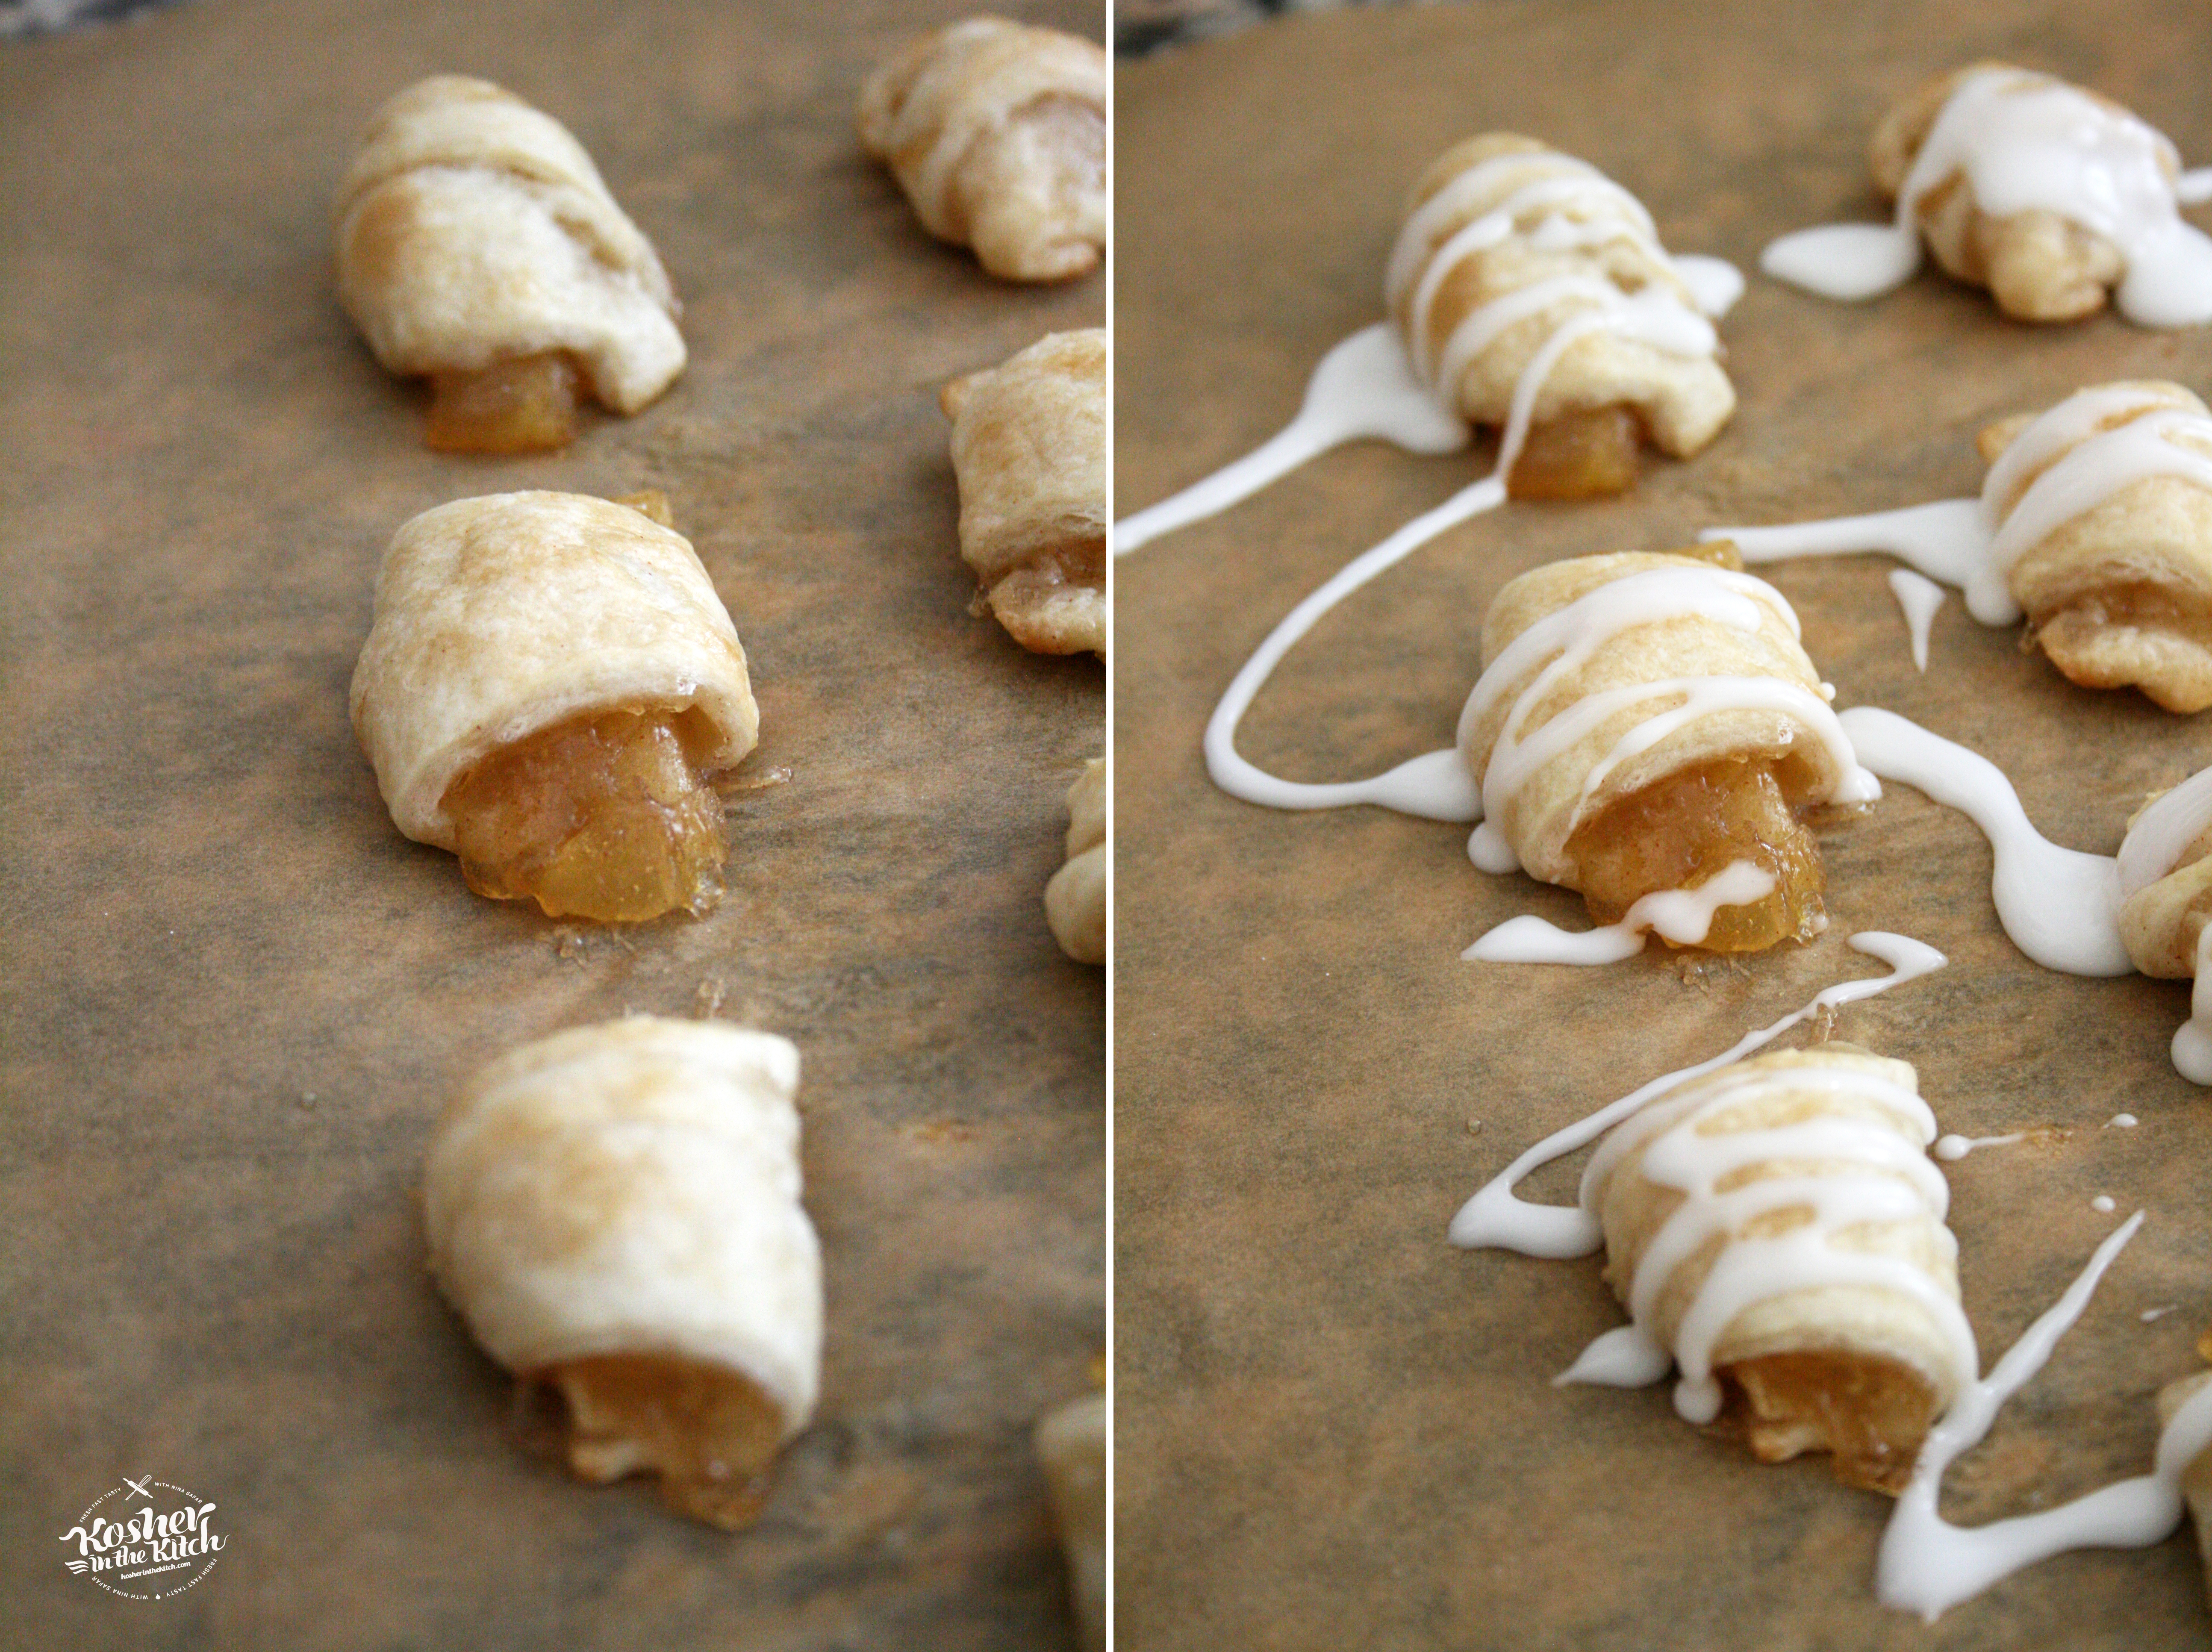 Allow rugelach to cool off before drizzling glaze on topa